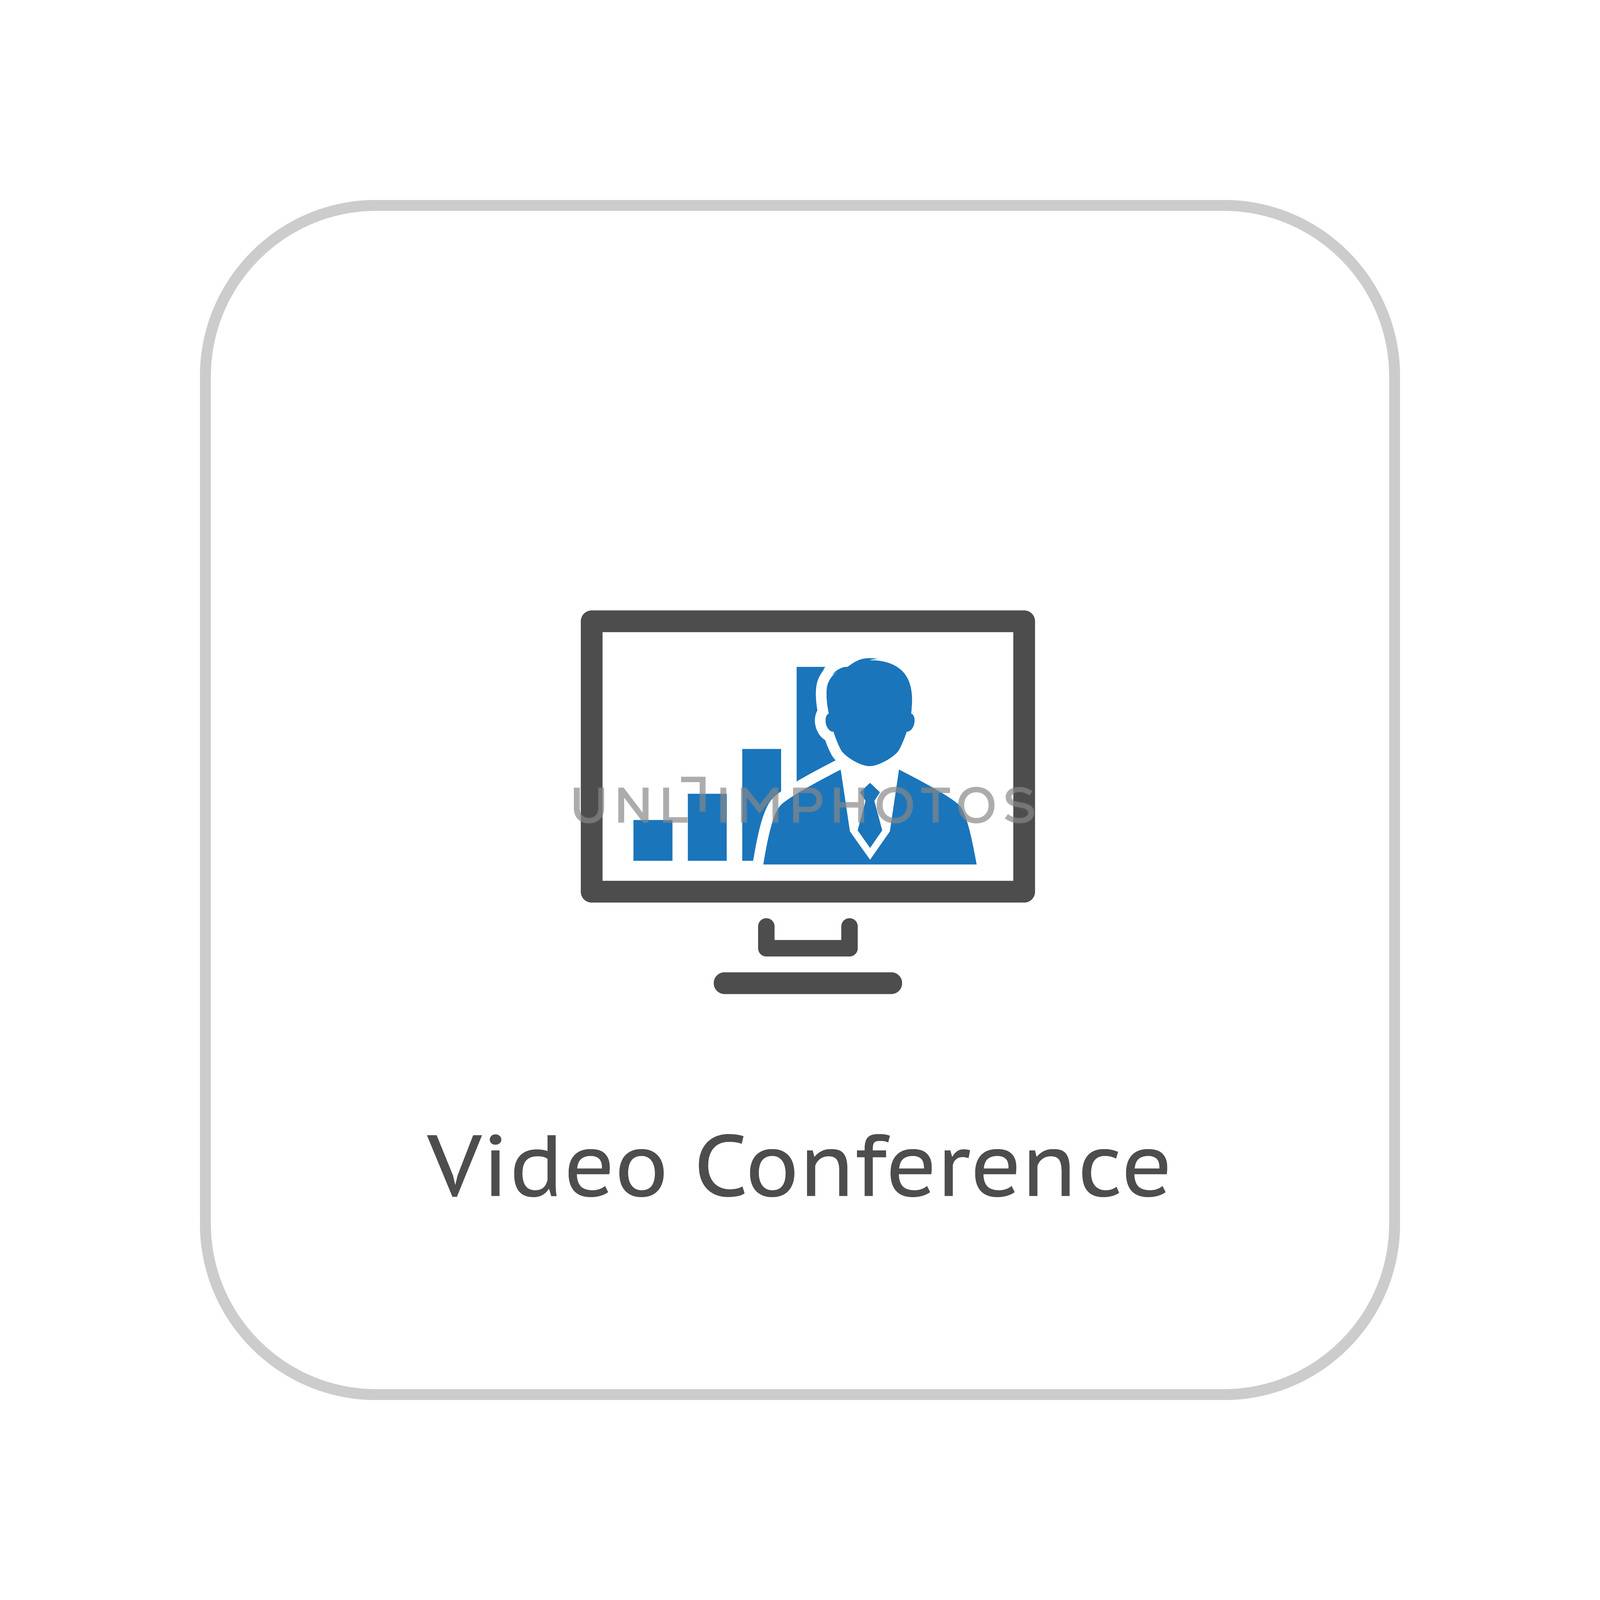 Video Conference Icon. Business Concept. Flat Design. by WaD